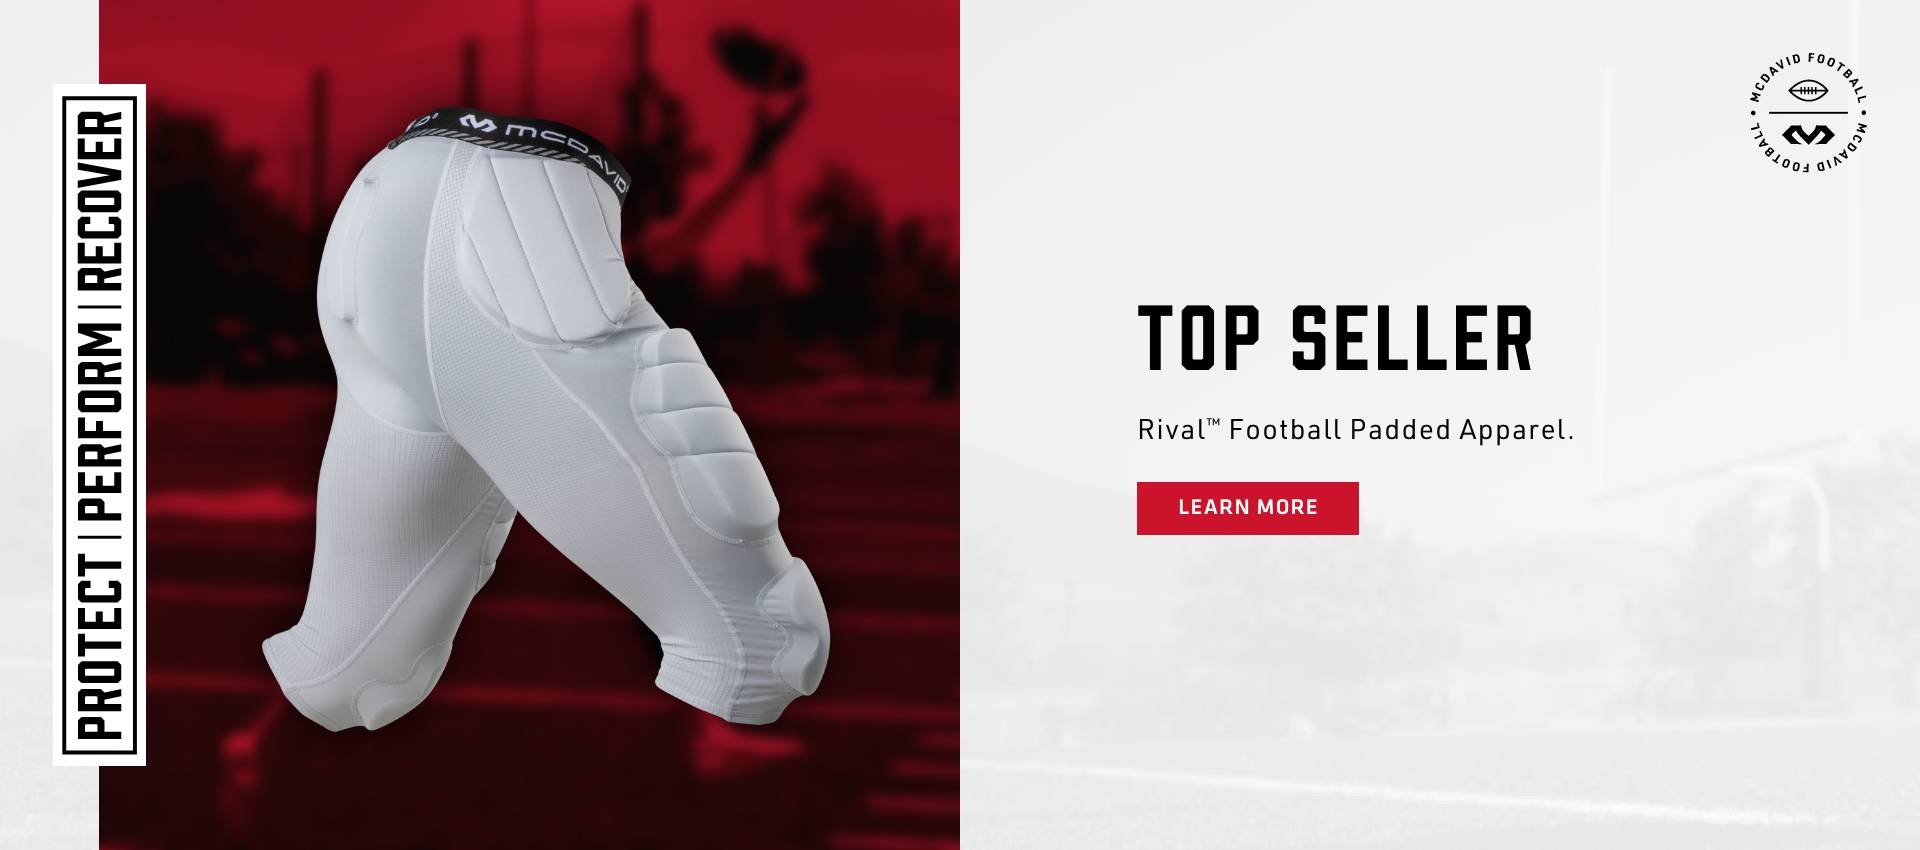 Top Seller - Rival™ Football Padded Apparel - LEARN MORE